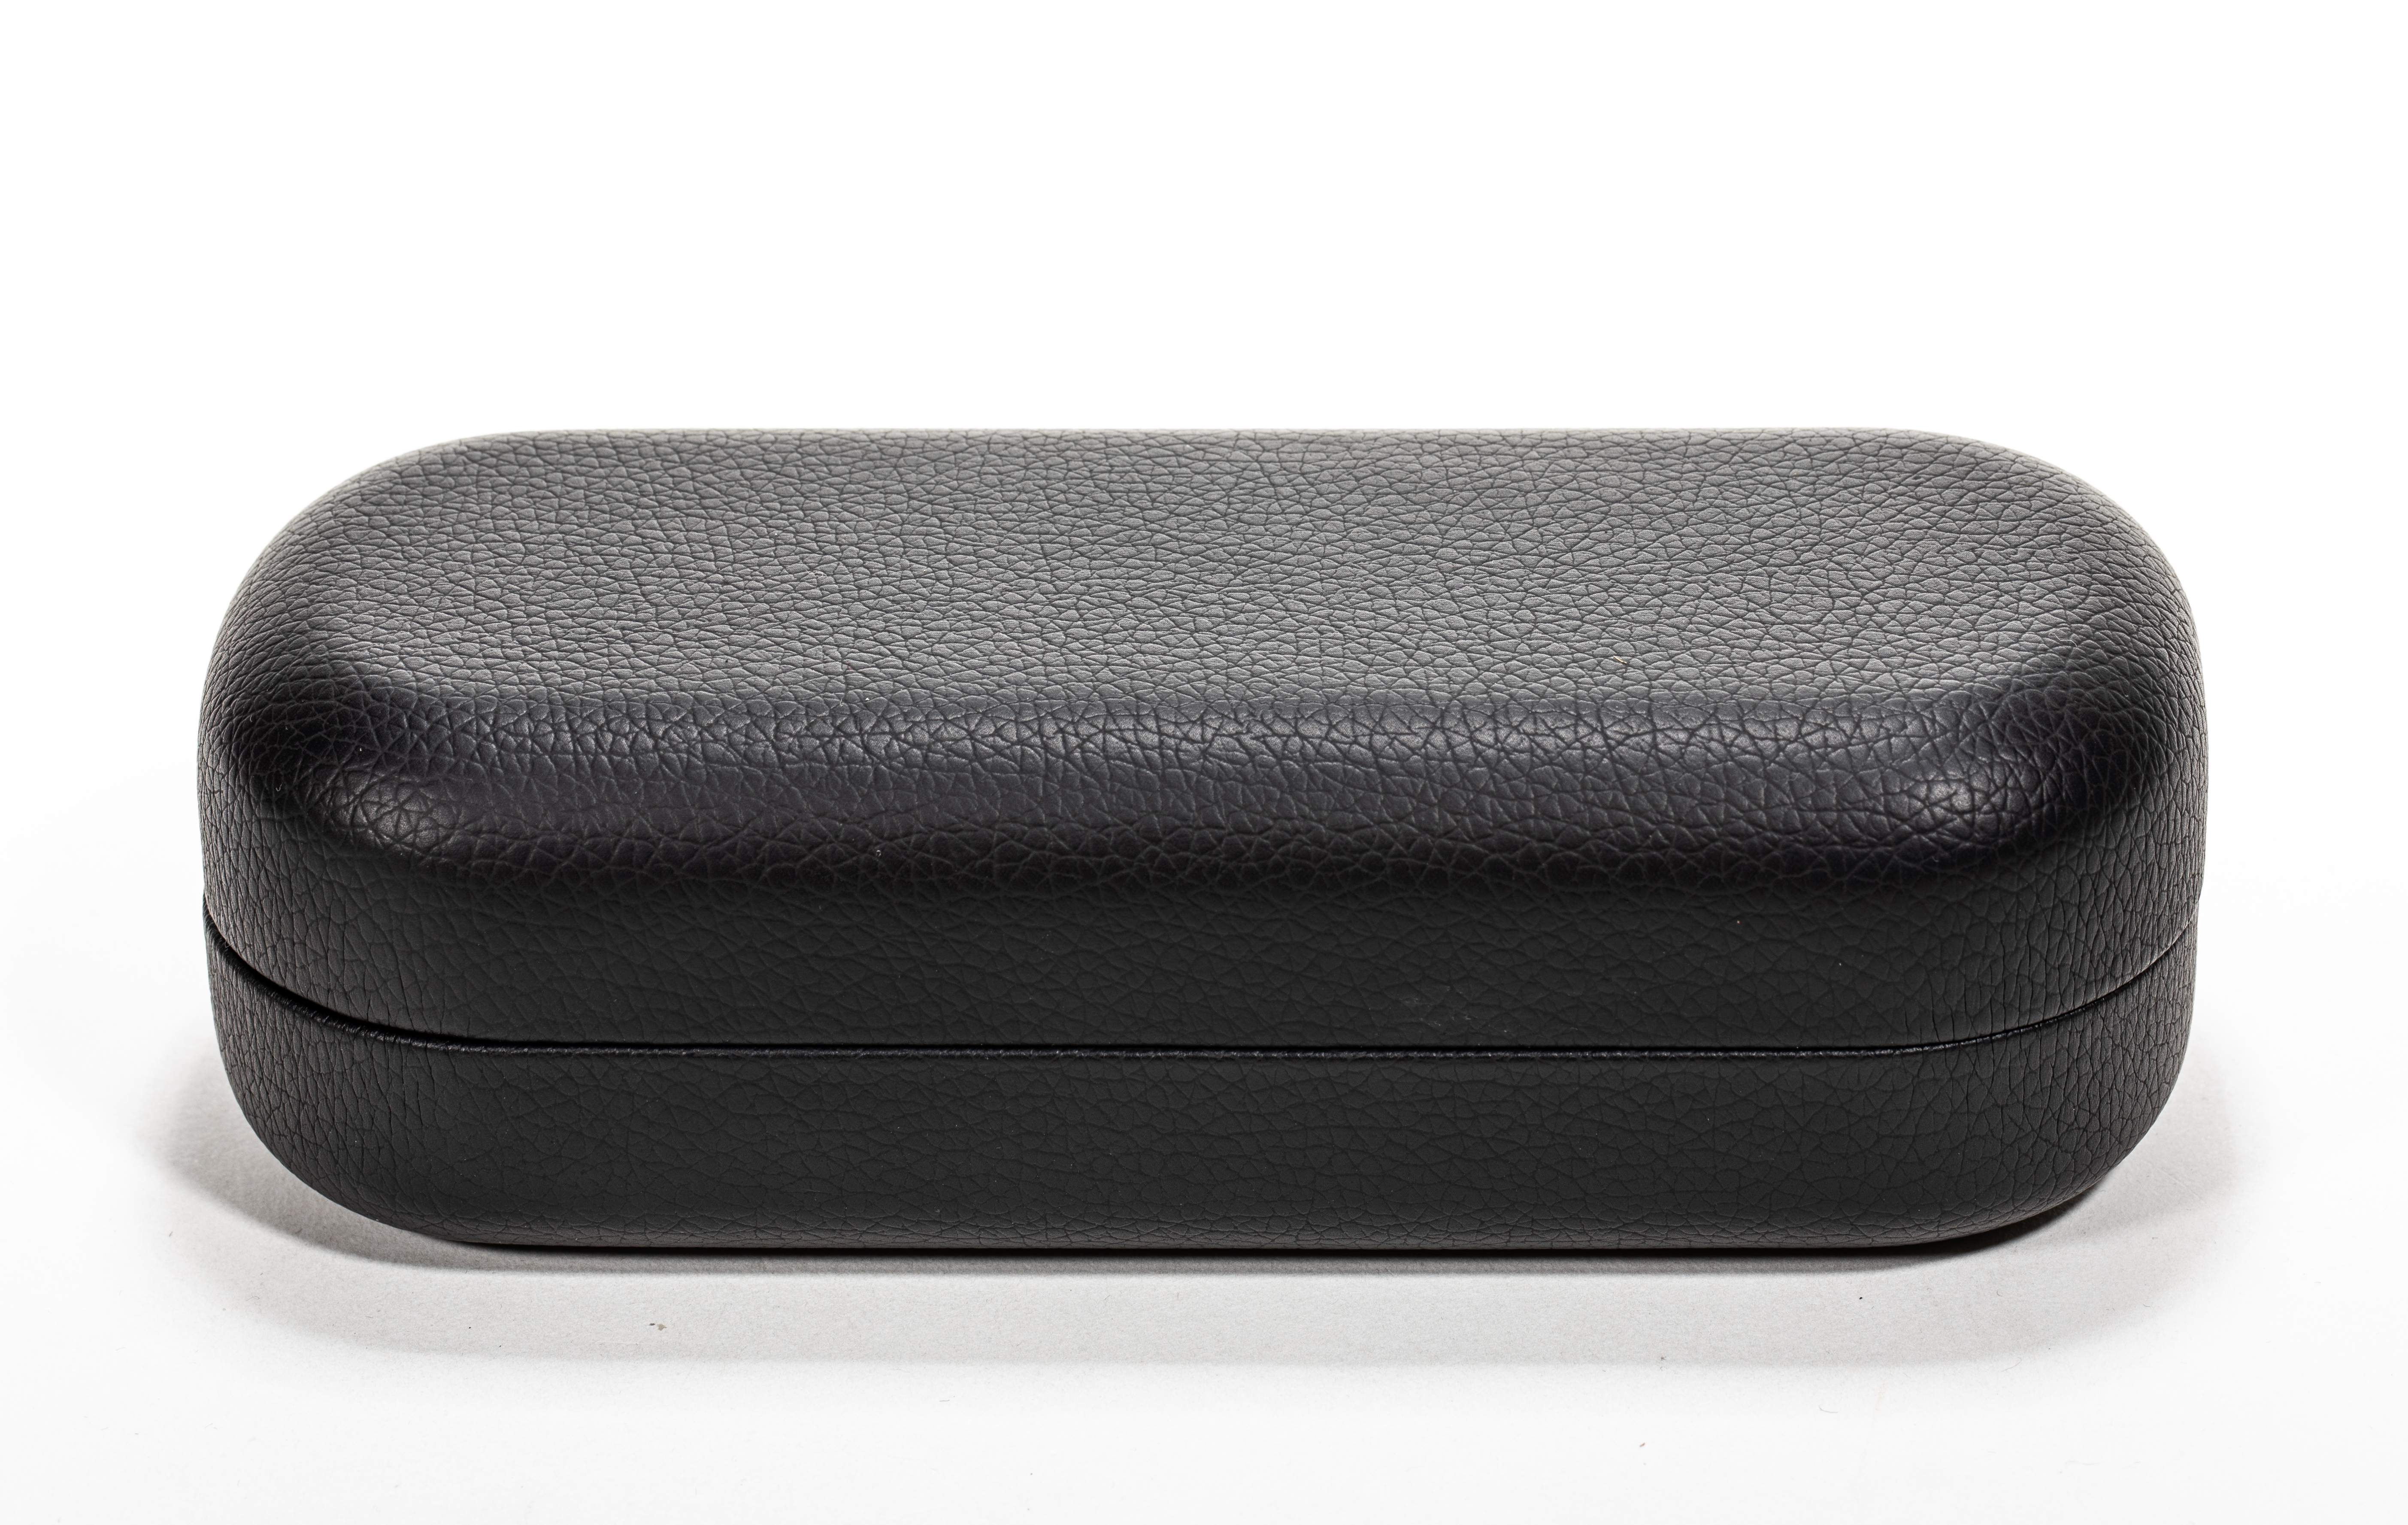 2021 Glasses Box Sunglasses Black Glasses Case, The Appearance Is Thick And Plump